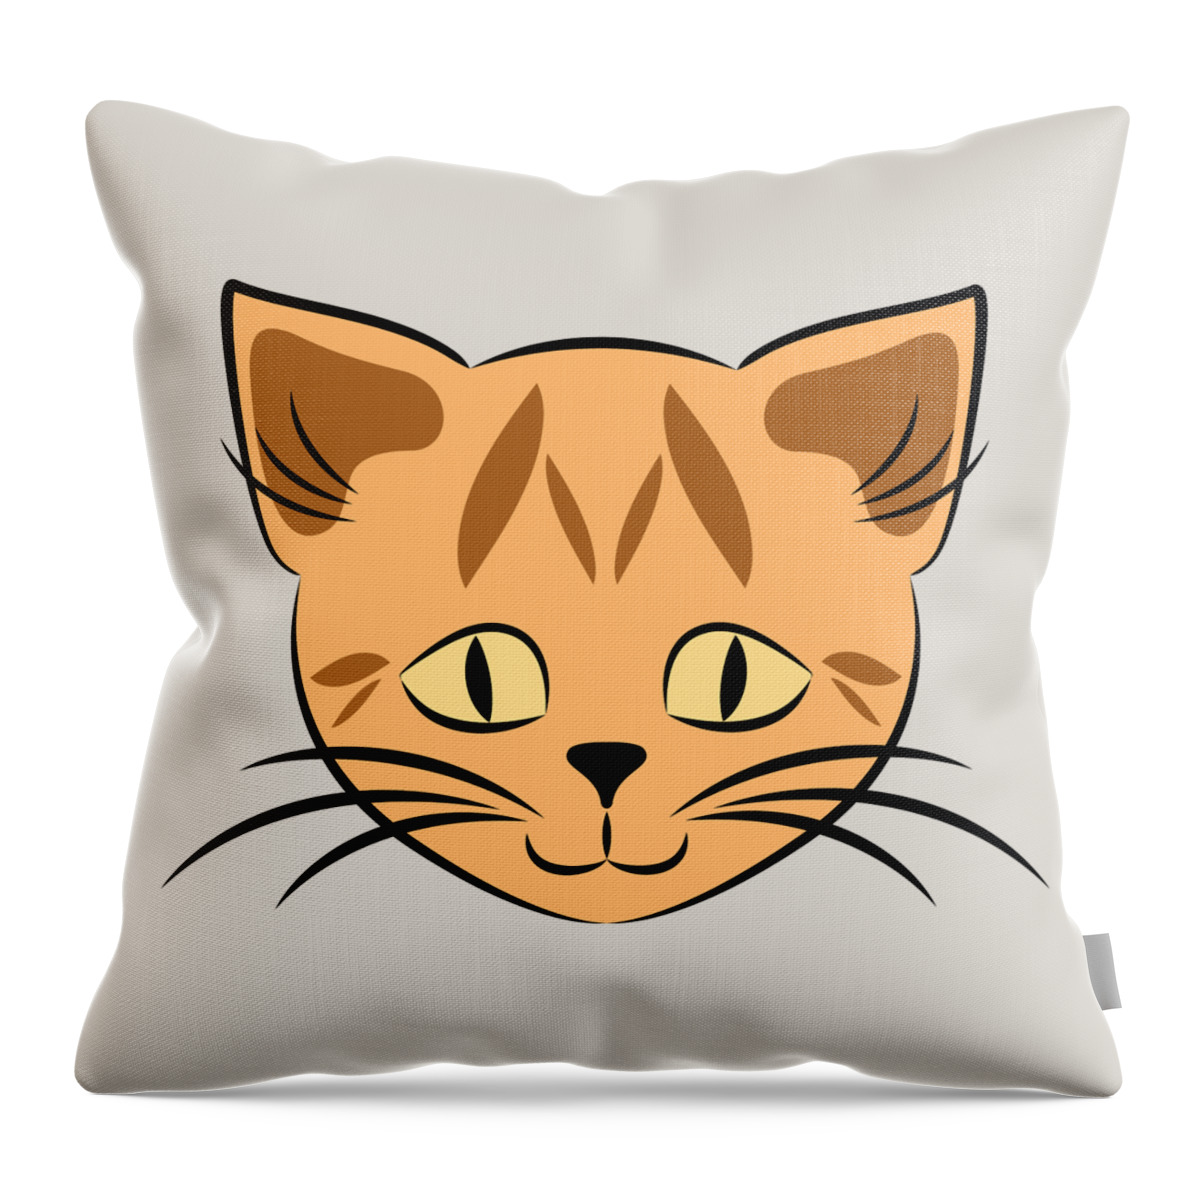 Graphic Cat Throw Pillow featuring the digital art Cute Orange Tabby Cat Face by MM Anderson